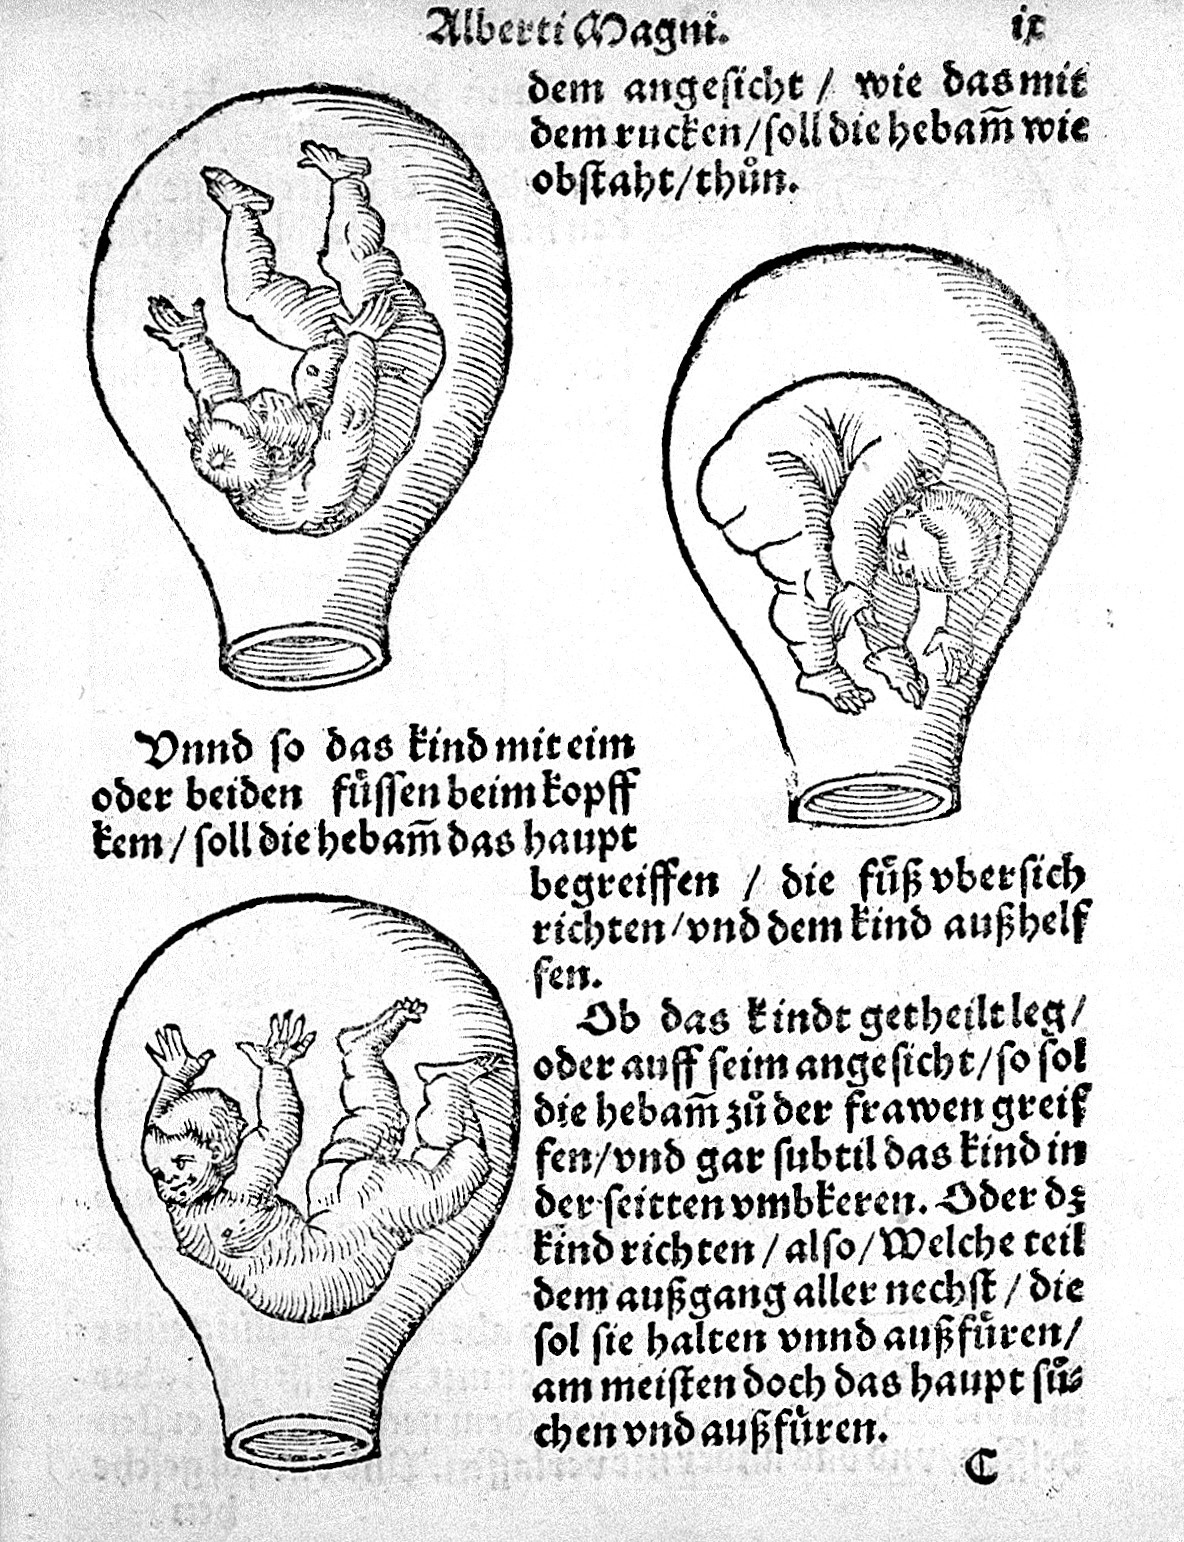 Drawings of foetuses in the womb in varying positions. The womb looks like an alchemical vessel; the foetuses have the features and proportions of an adult. 